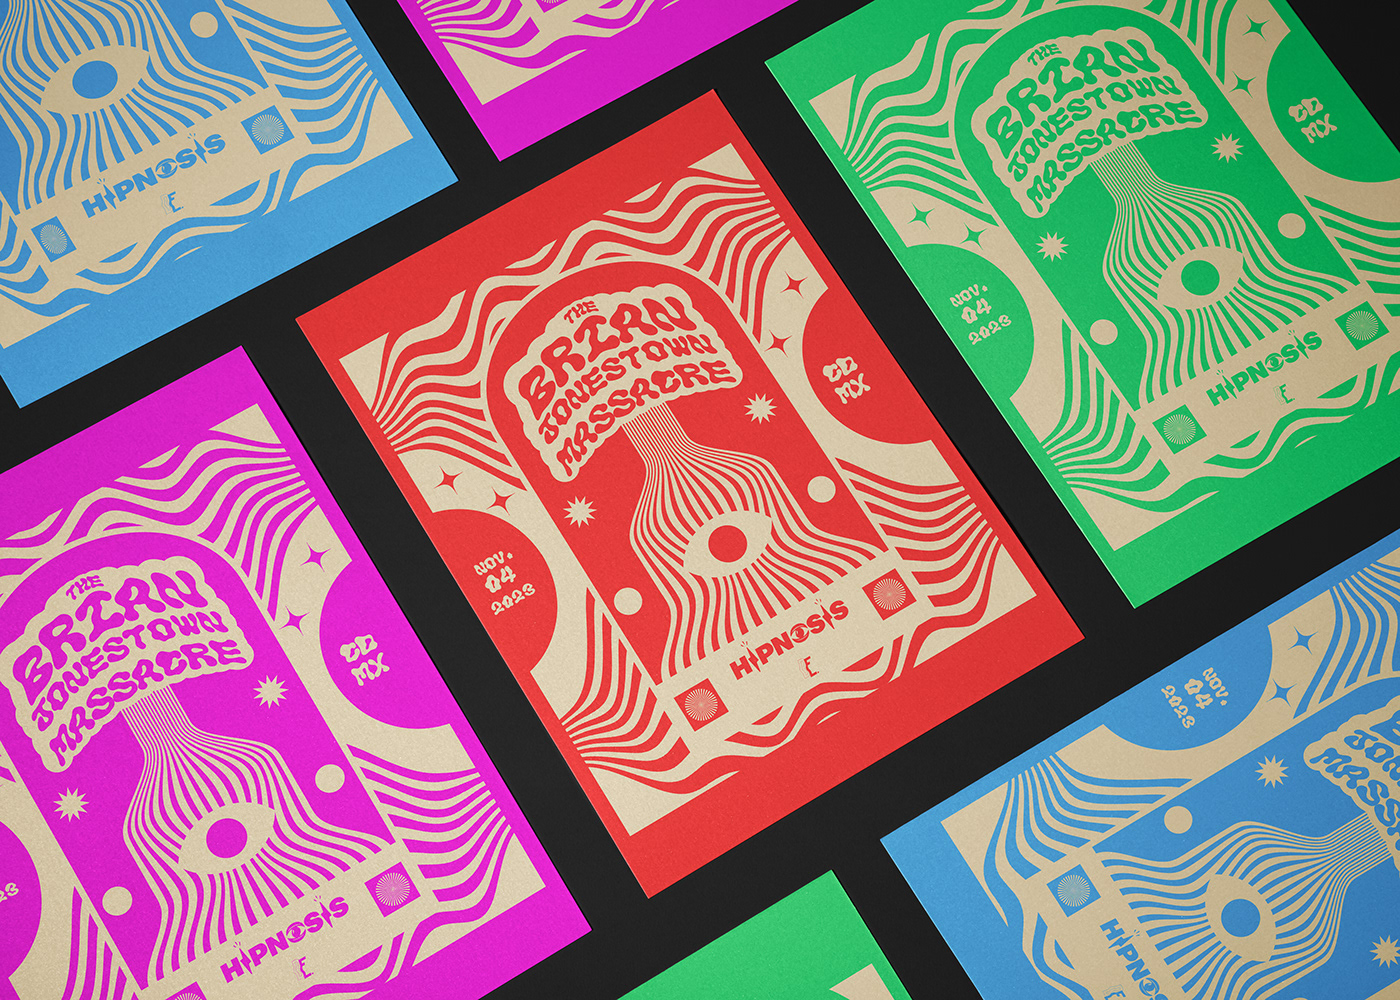 psychedelic art posterdesign festivaldemusica mexicandesign diseñomexicano shoegaze psychedelic bandposter psychedelicposter